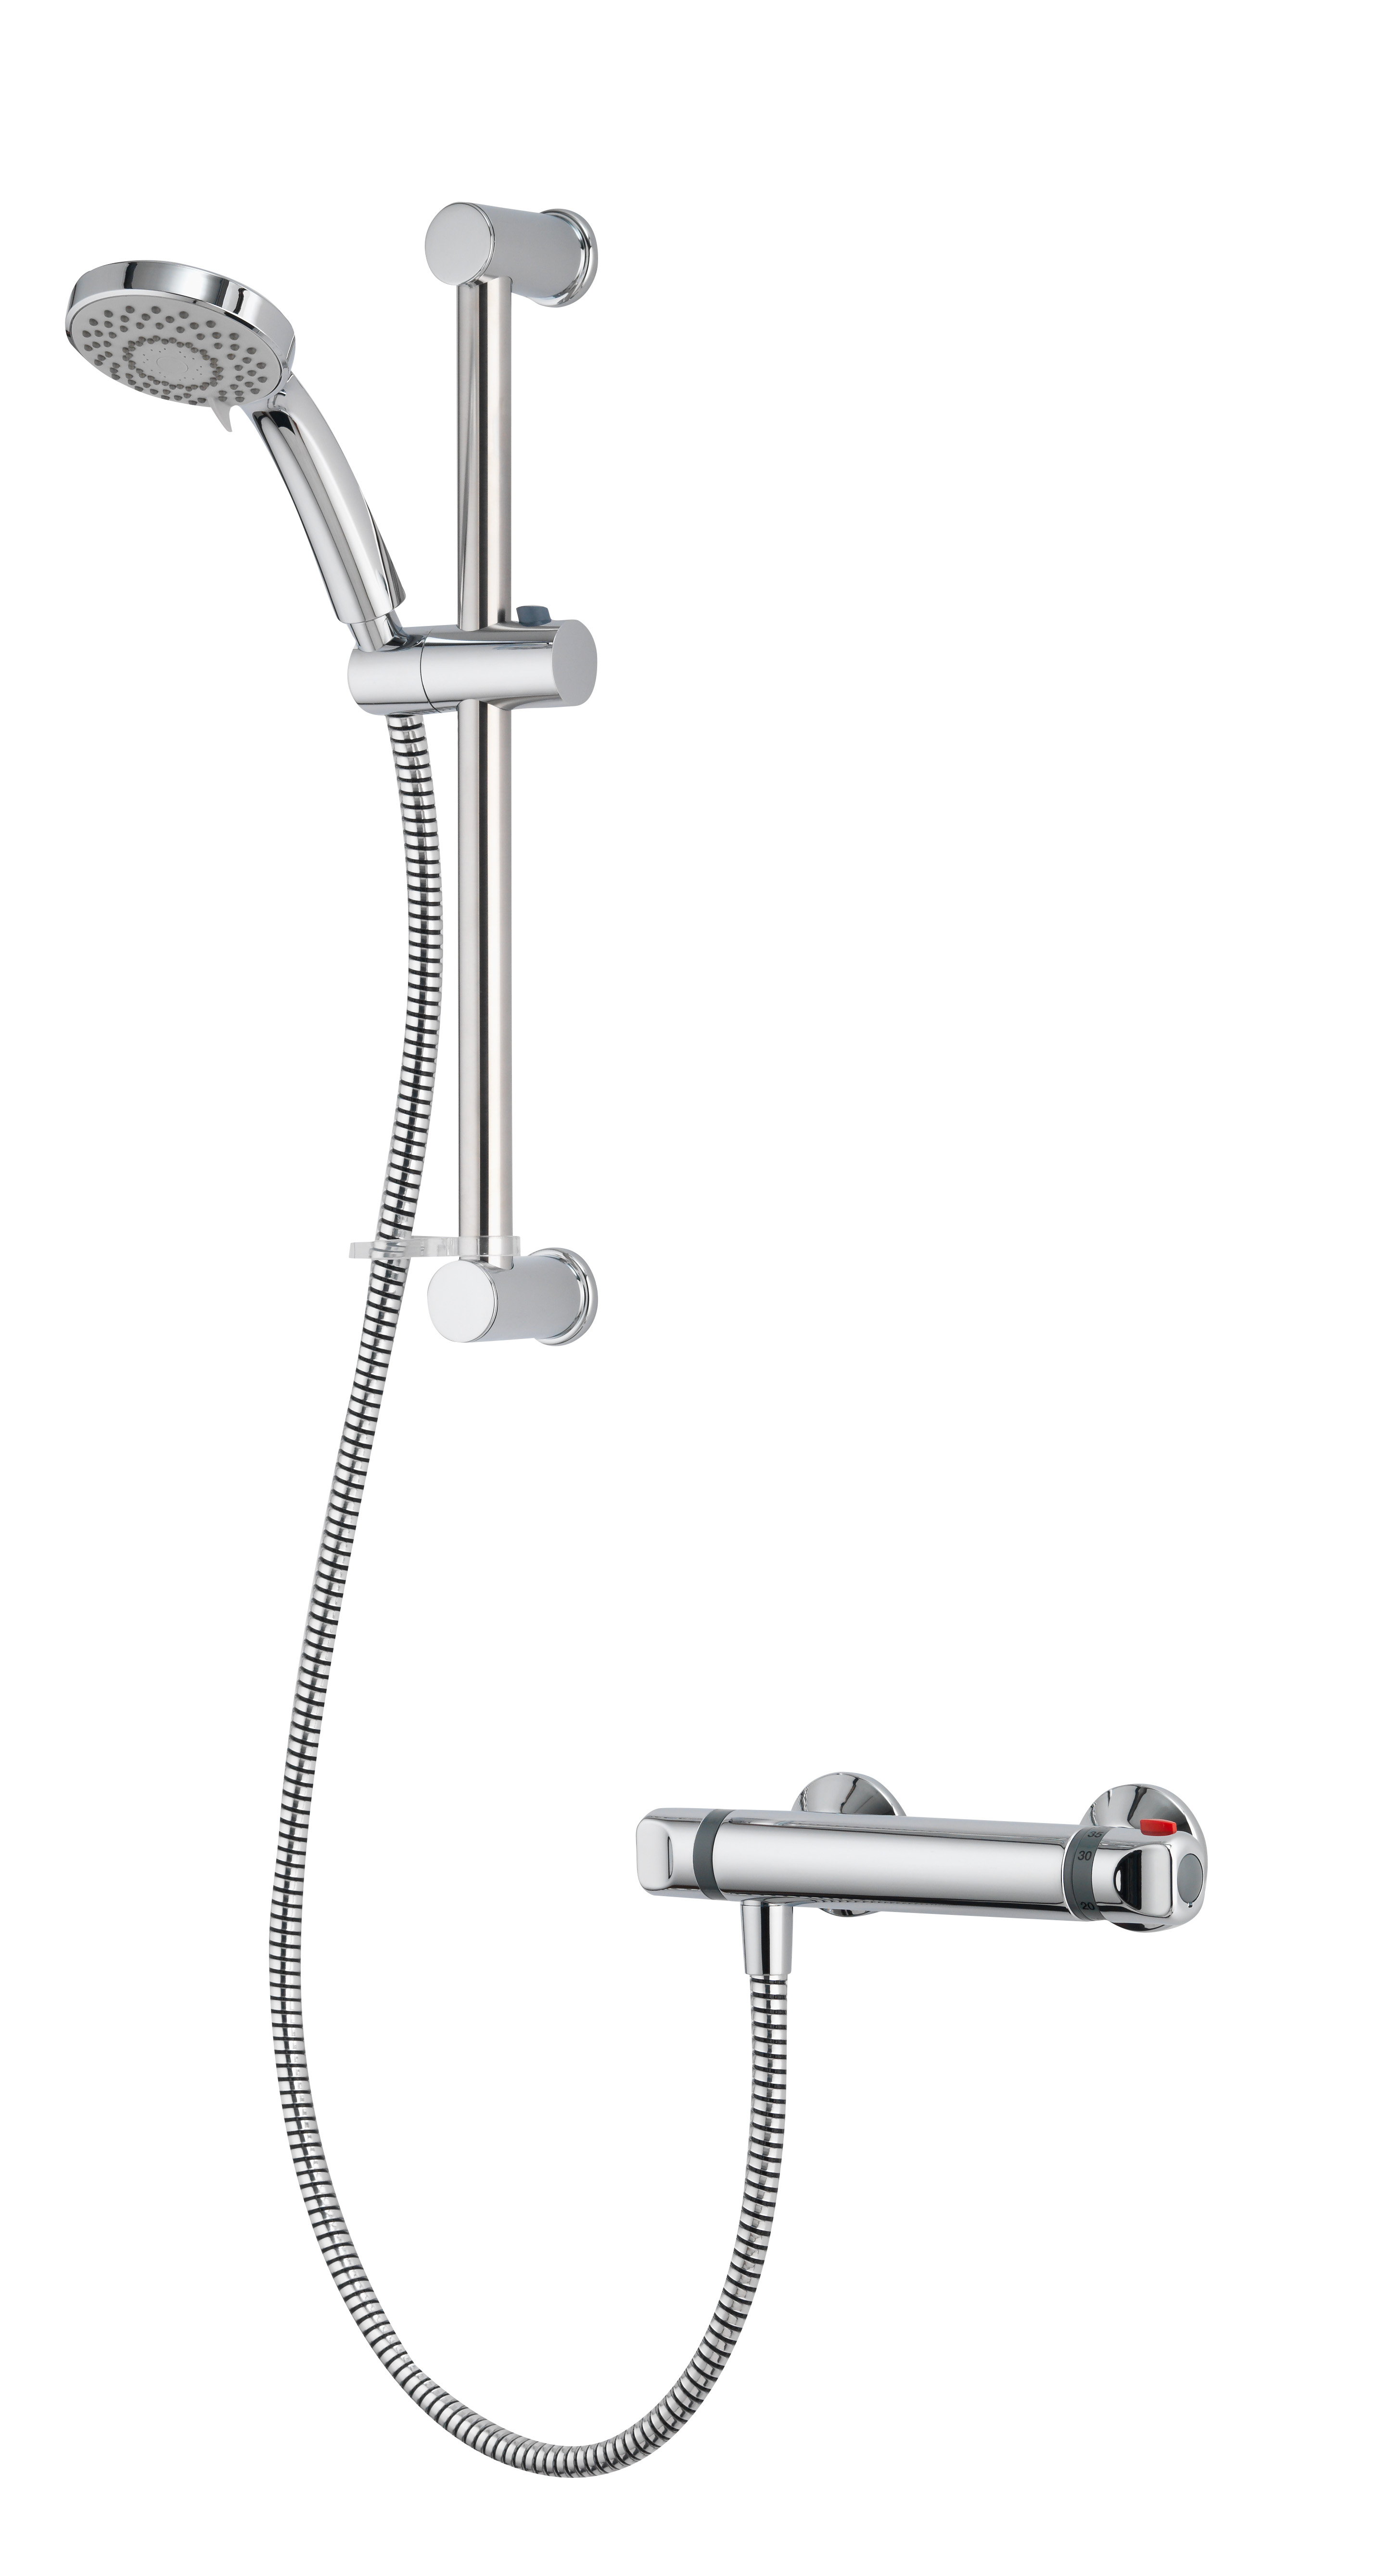 GT250 Bar Shower, only £79.99 until 16th January 2014